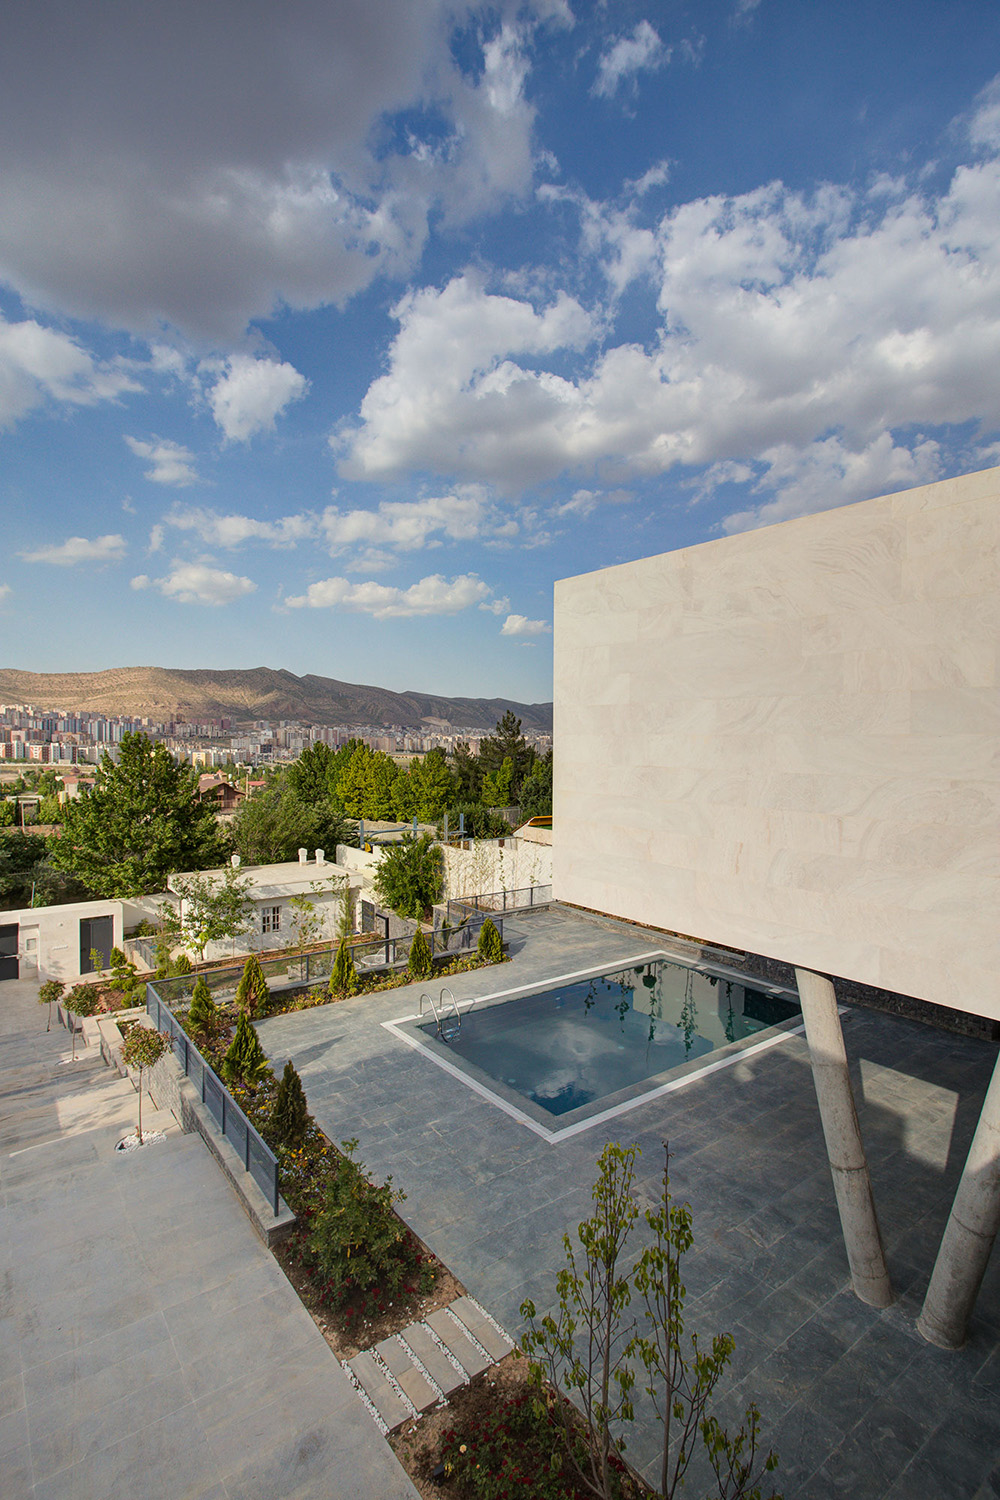 picture no. 2 ofVilla No. 07 project, designed by Ahmad Ghodsimanesh & Partners